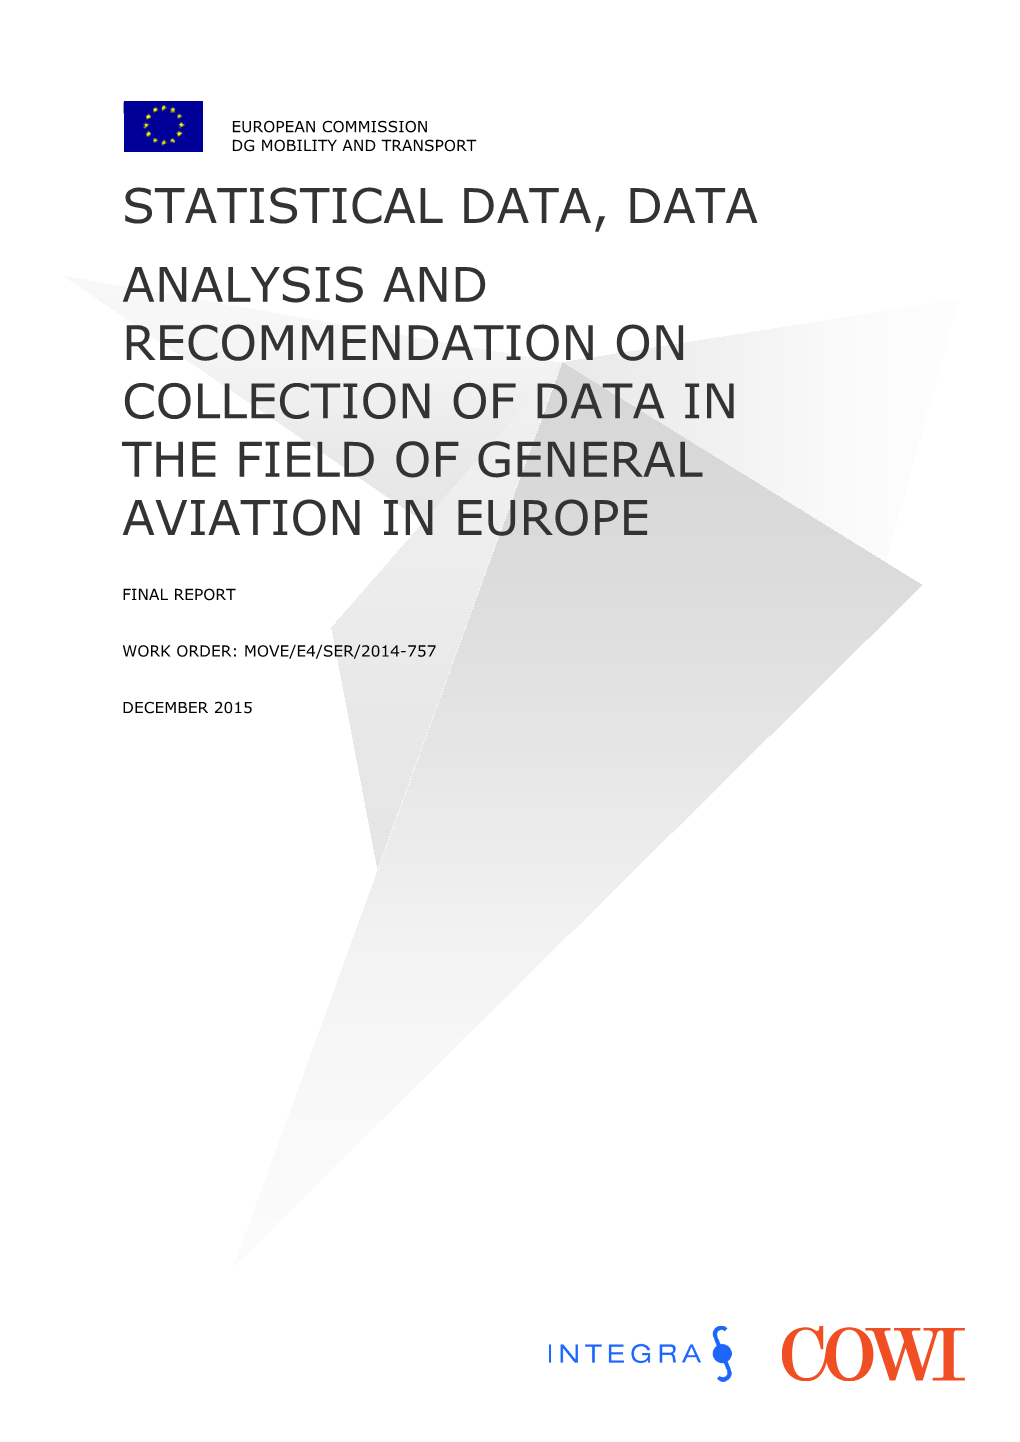 Statistical Data, Data Analysis and Recommendation on Collection of Data in the Field of General Aviation in Europe